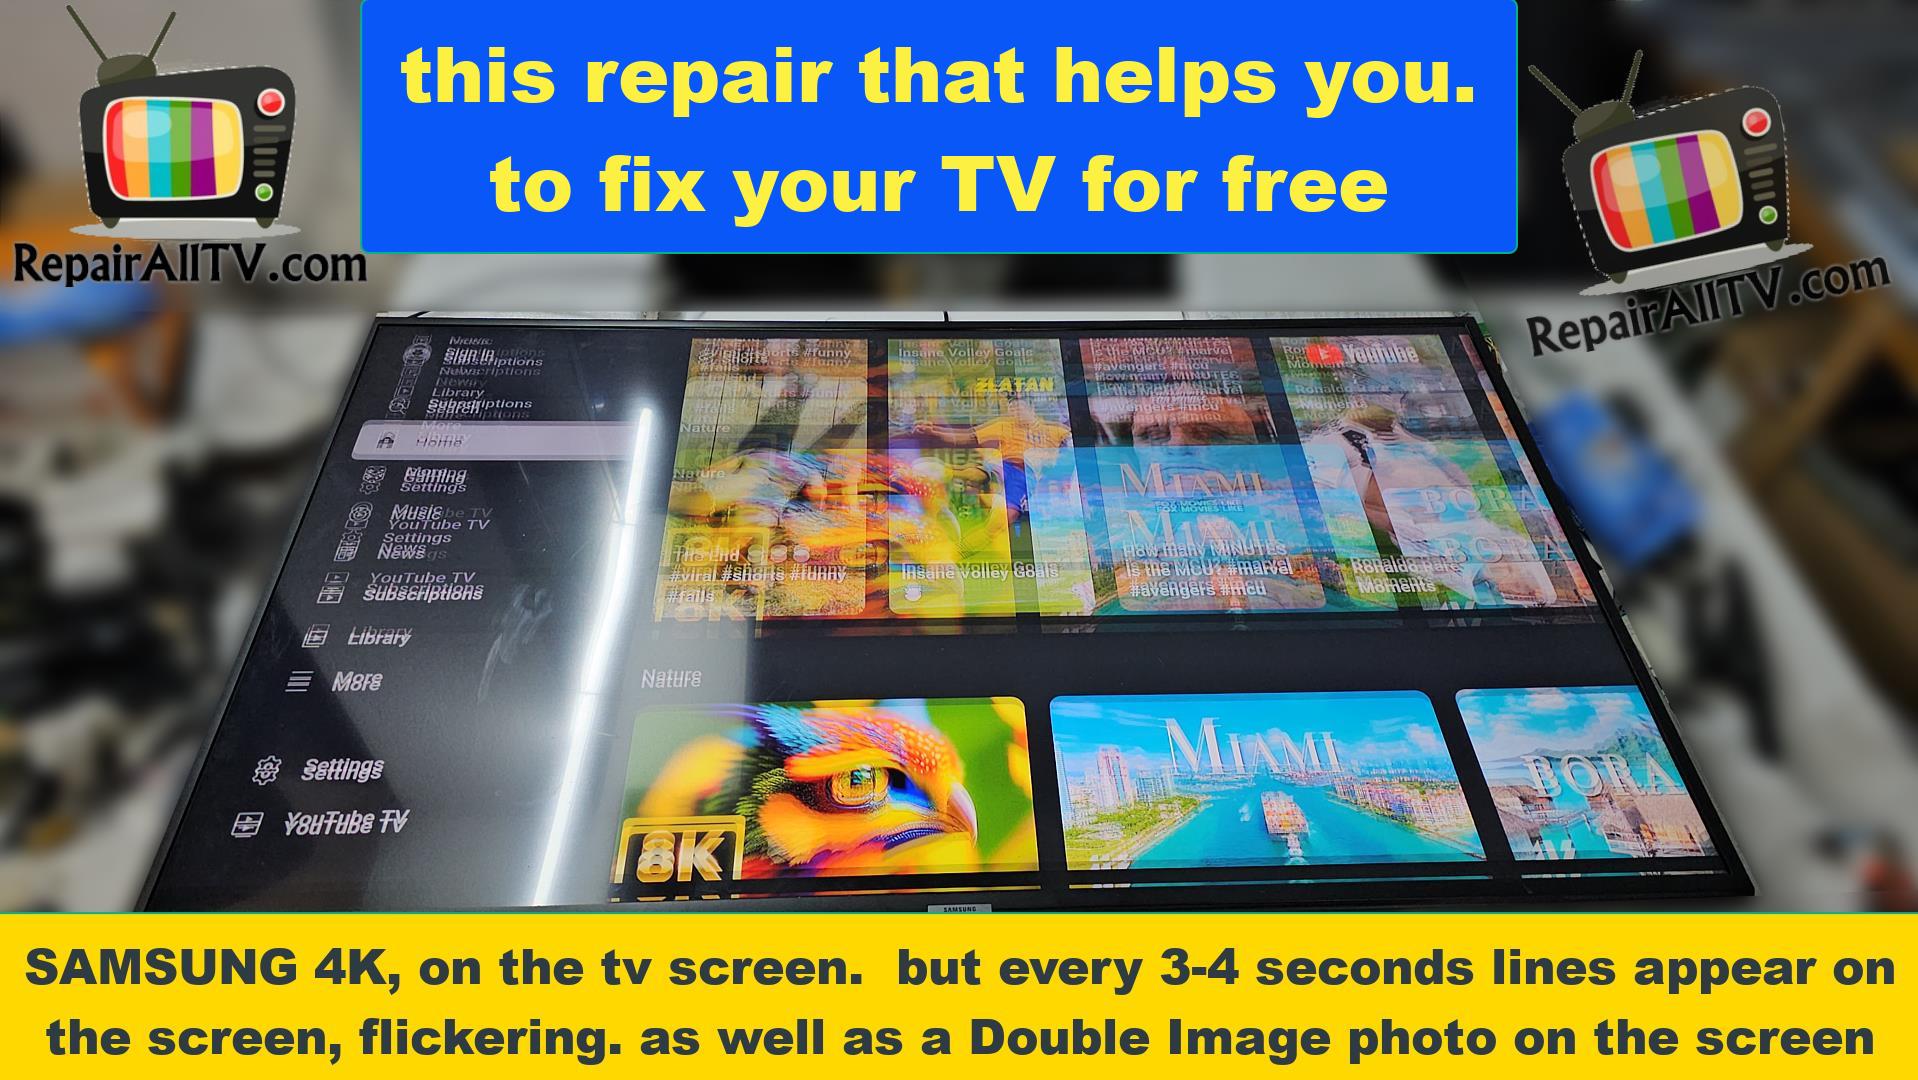 SAMSUNG 4K this repair that helps you. to fix your TV for free